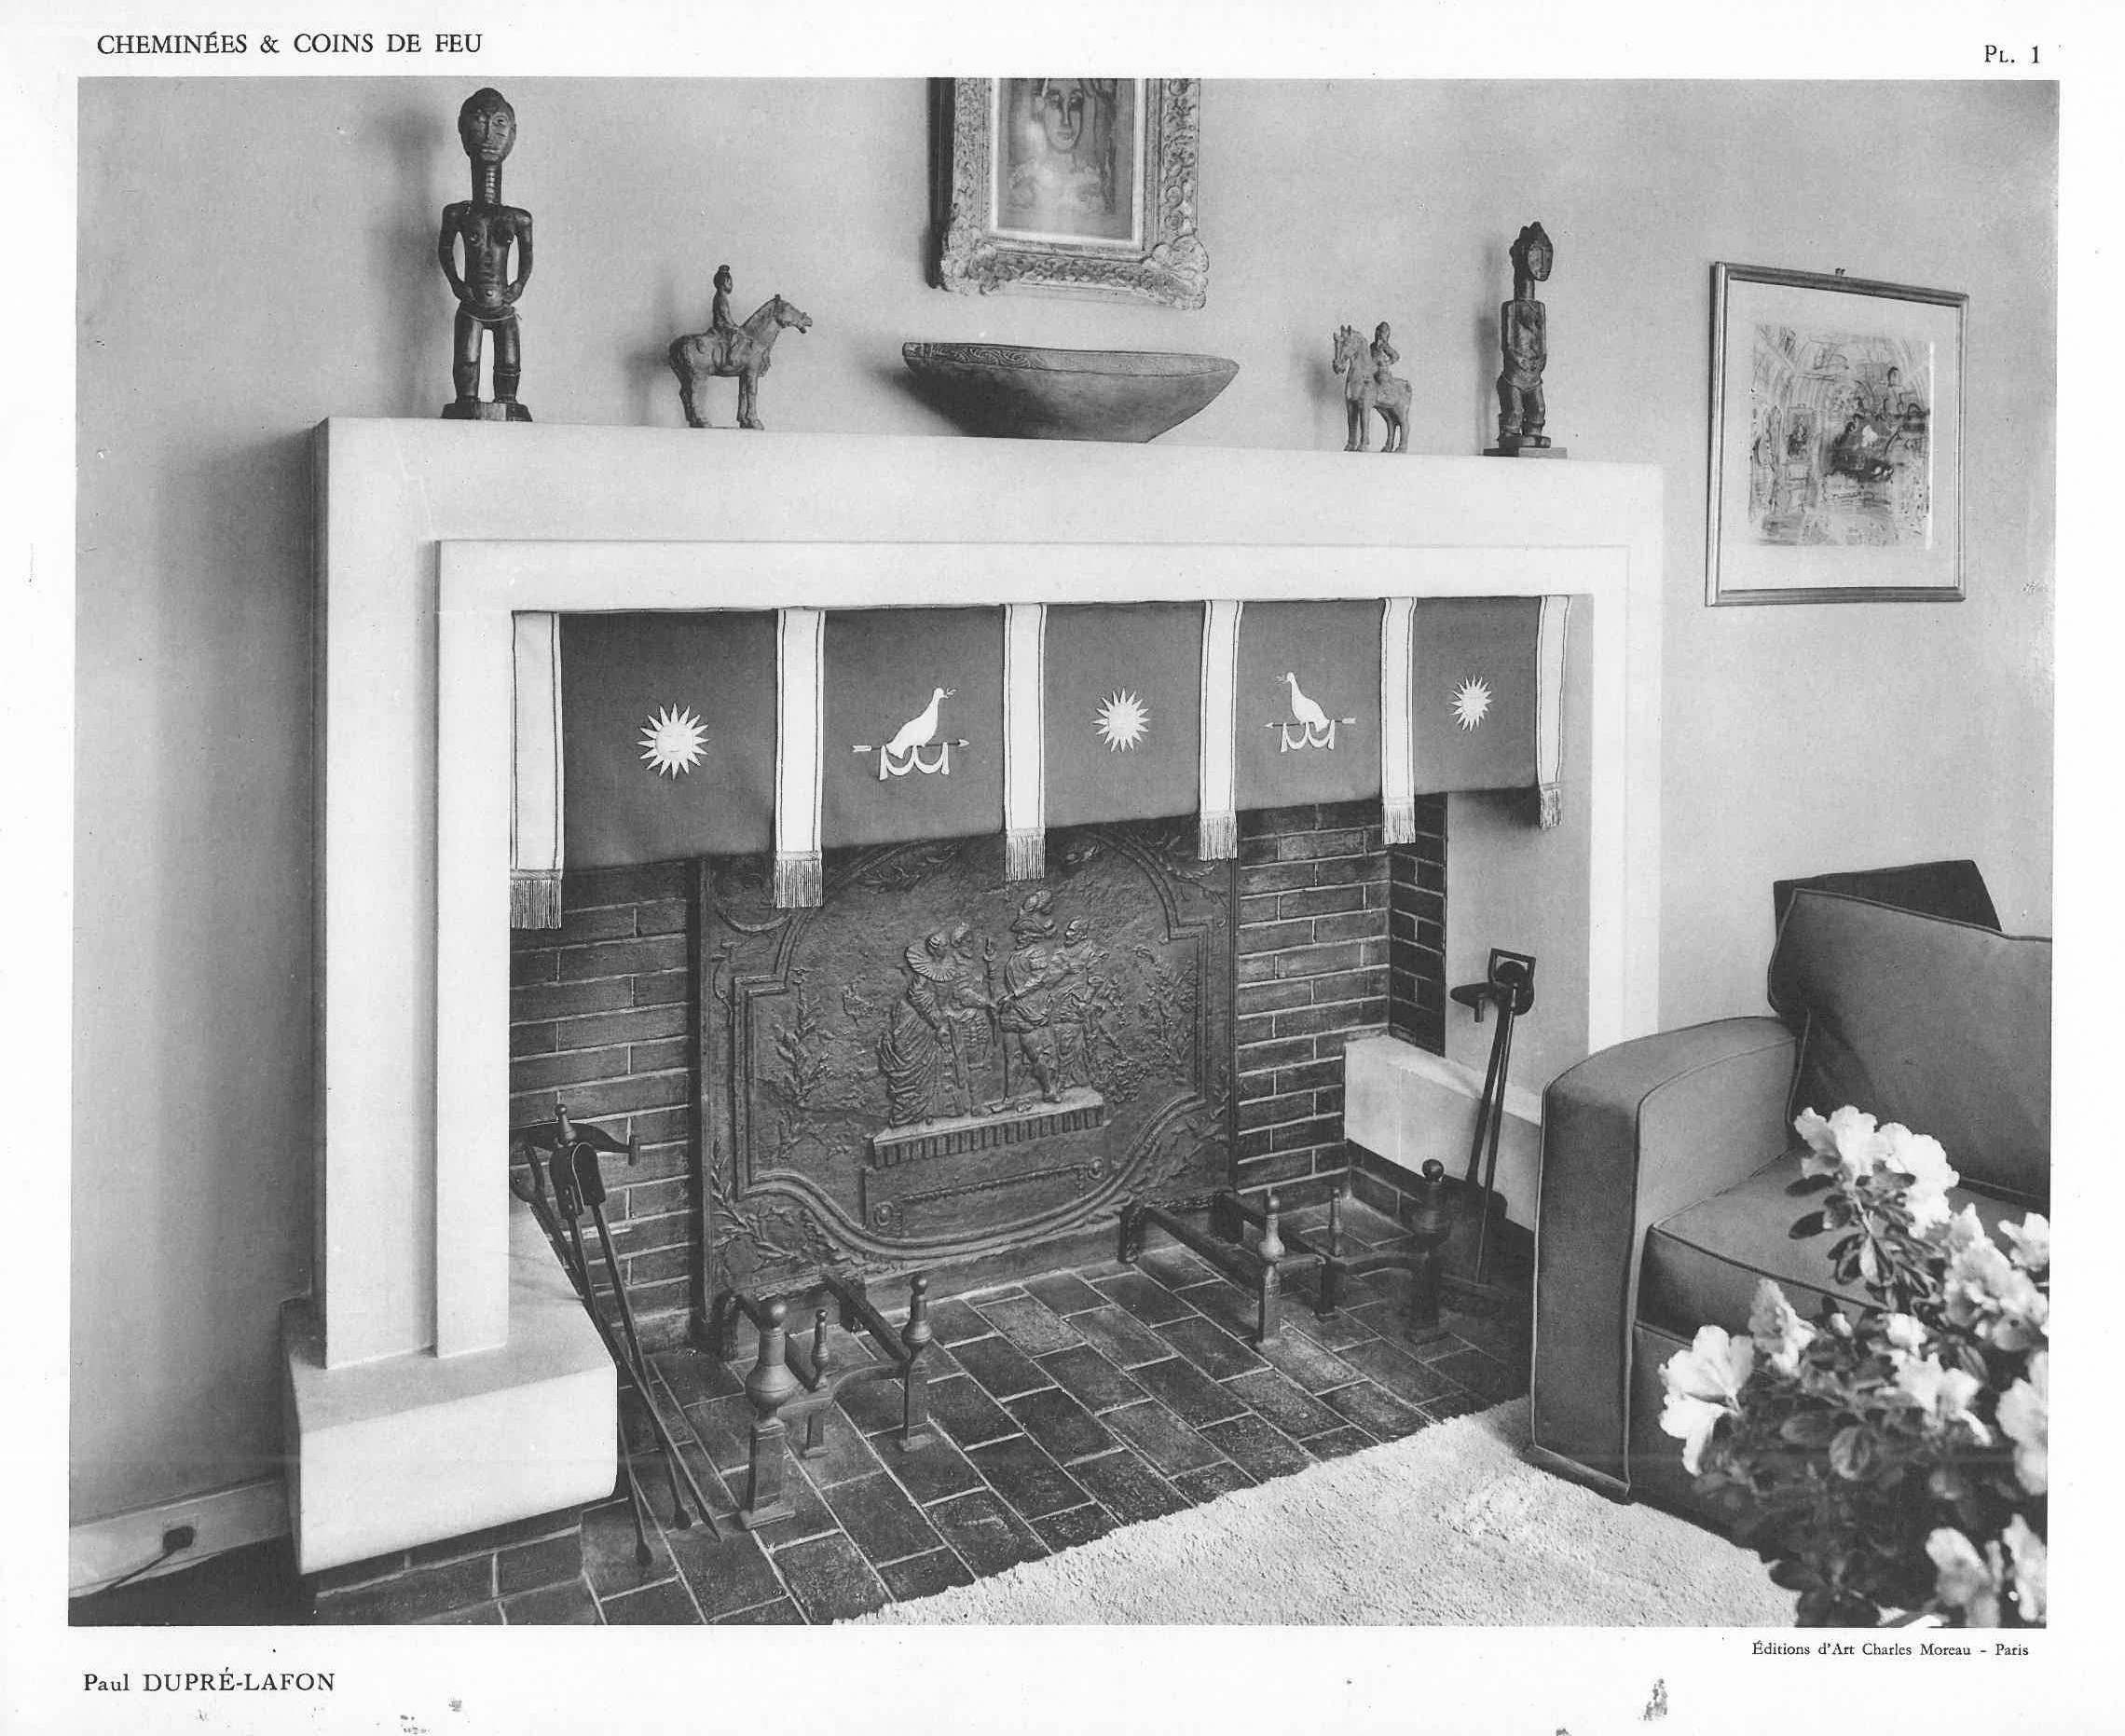 Jean Royere was one of the leading French furniture designers of the middle years of the twentieth century, who put together and edited this collection of Chimney and fireplace designs from the 1940's. The designers featured includes - Paul